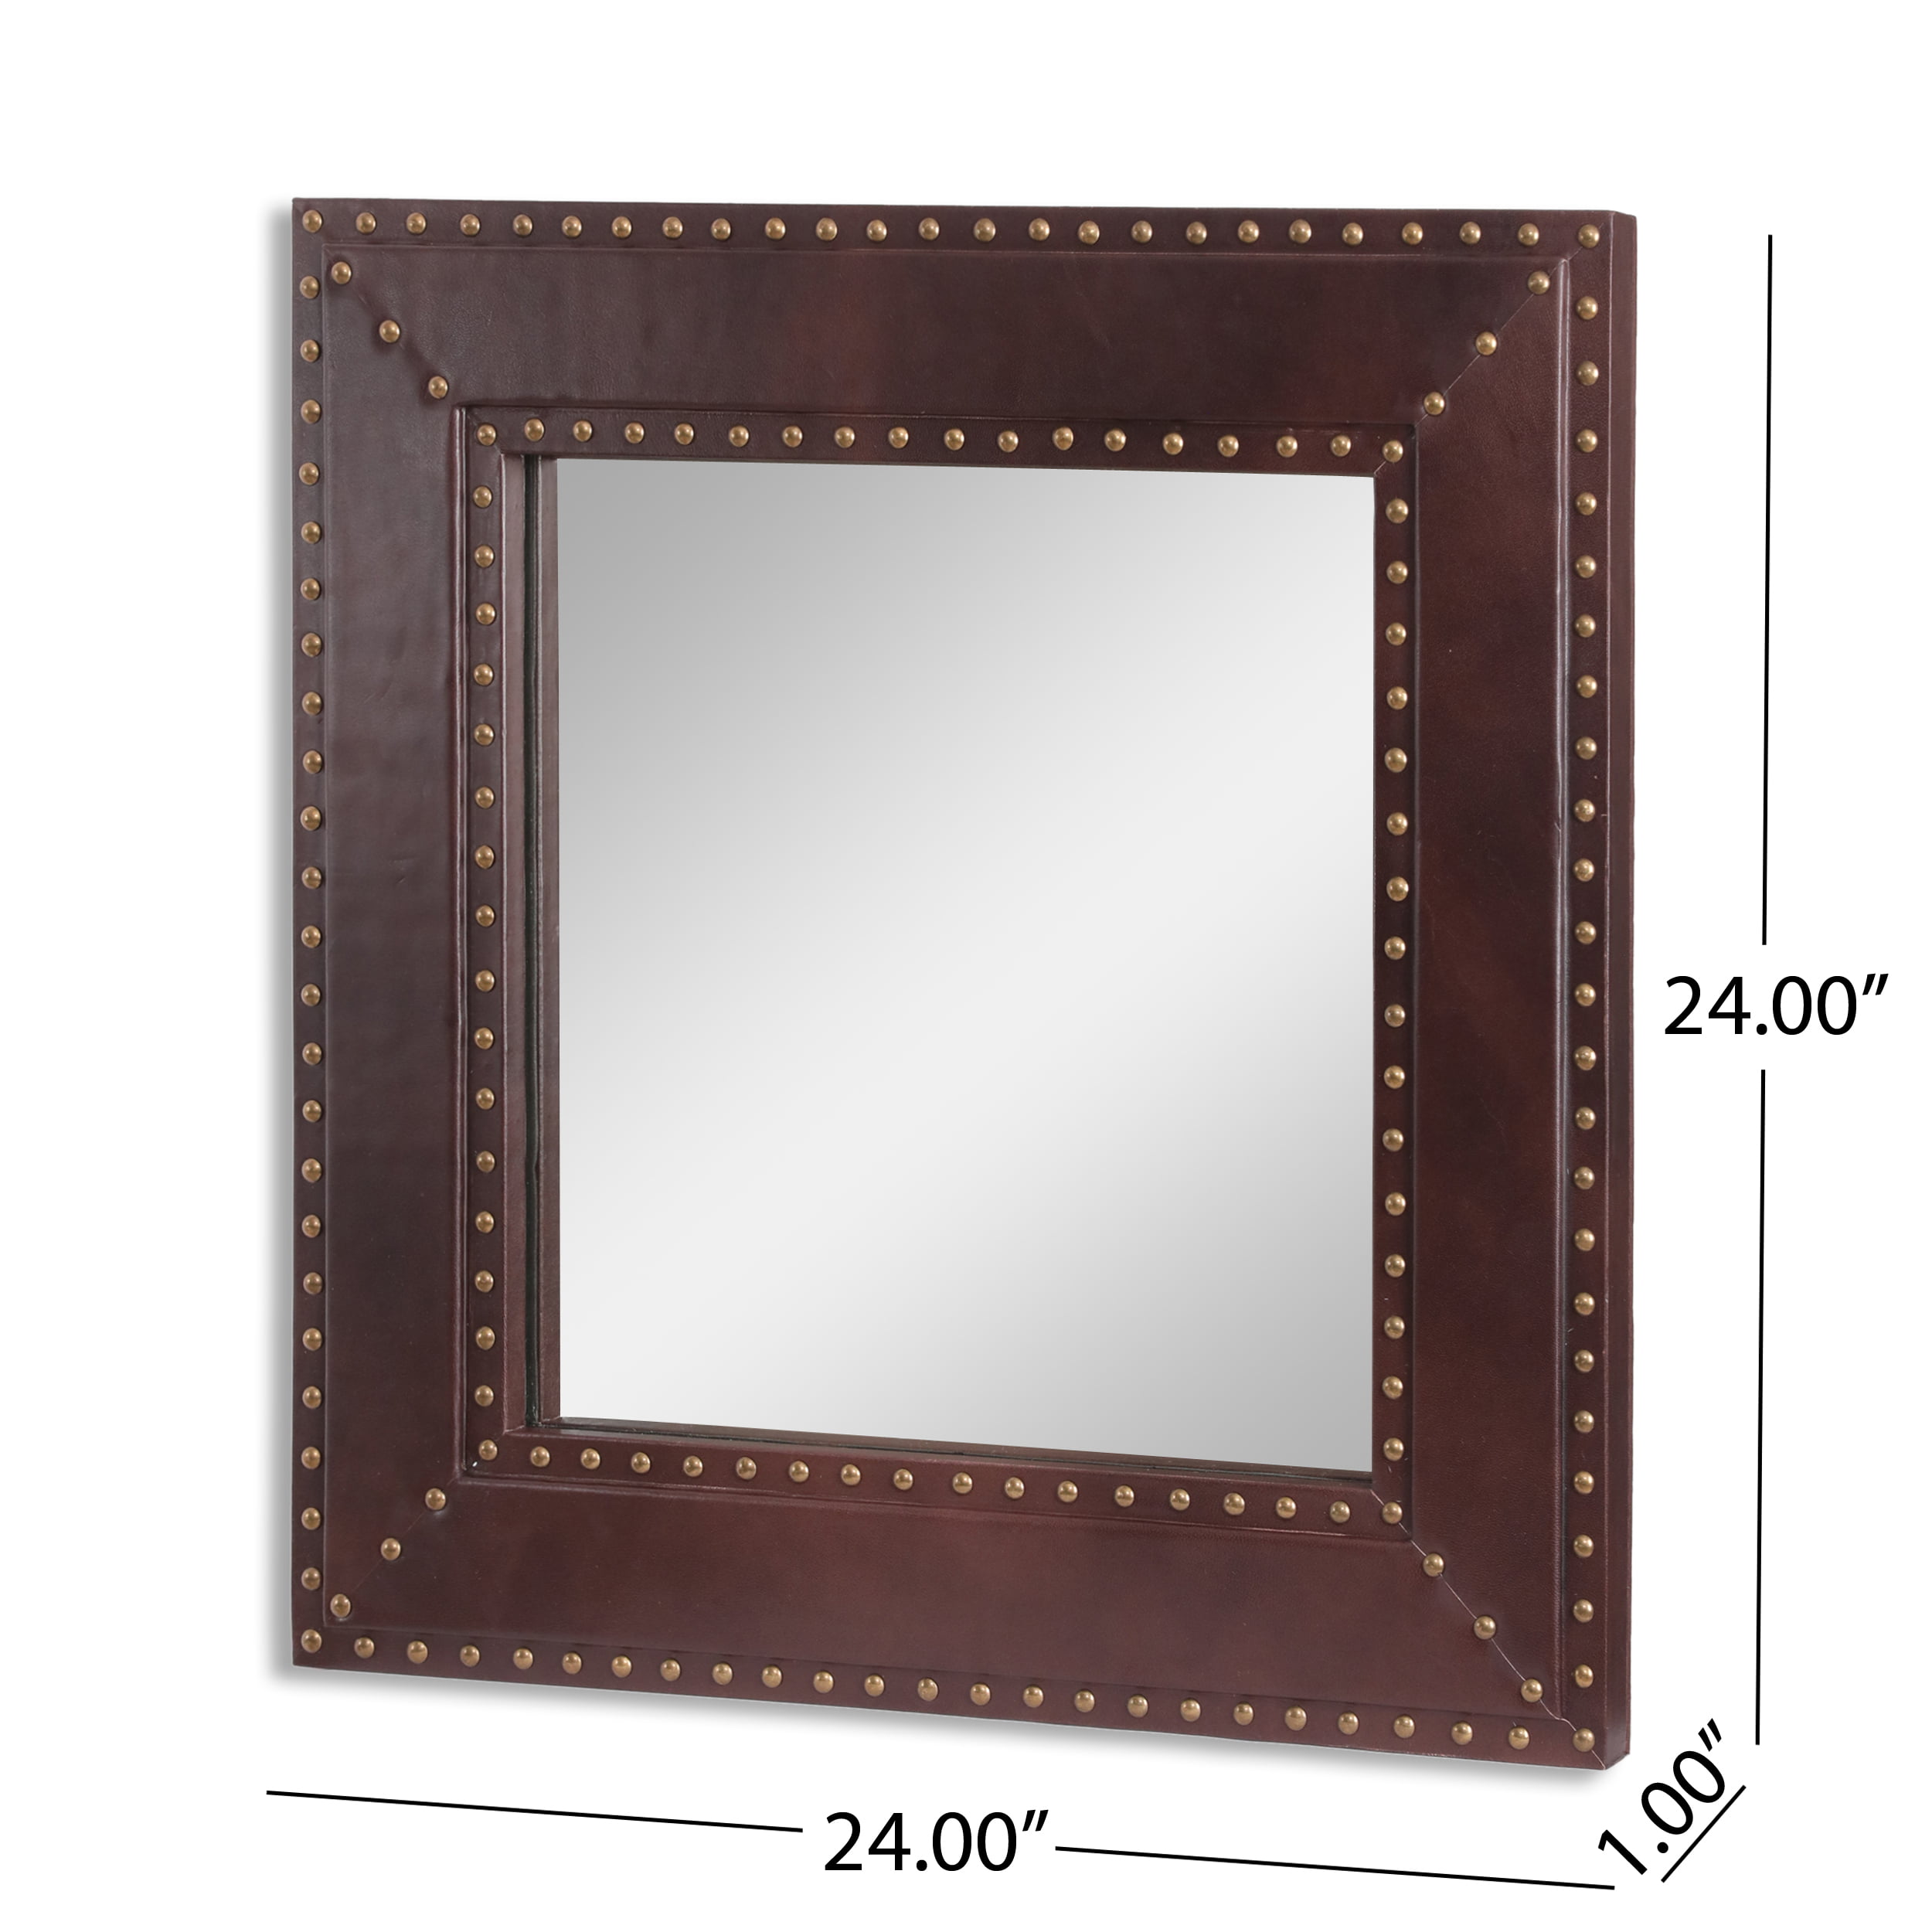 MirrorChic Tuxedo 24 in. x 36 in. Mirror Frame Kit in Walnut - Mirror Not  Included E183480-03 - The Home Depot